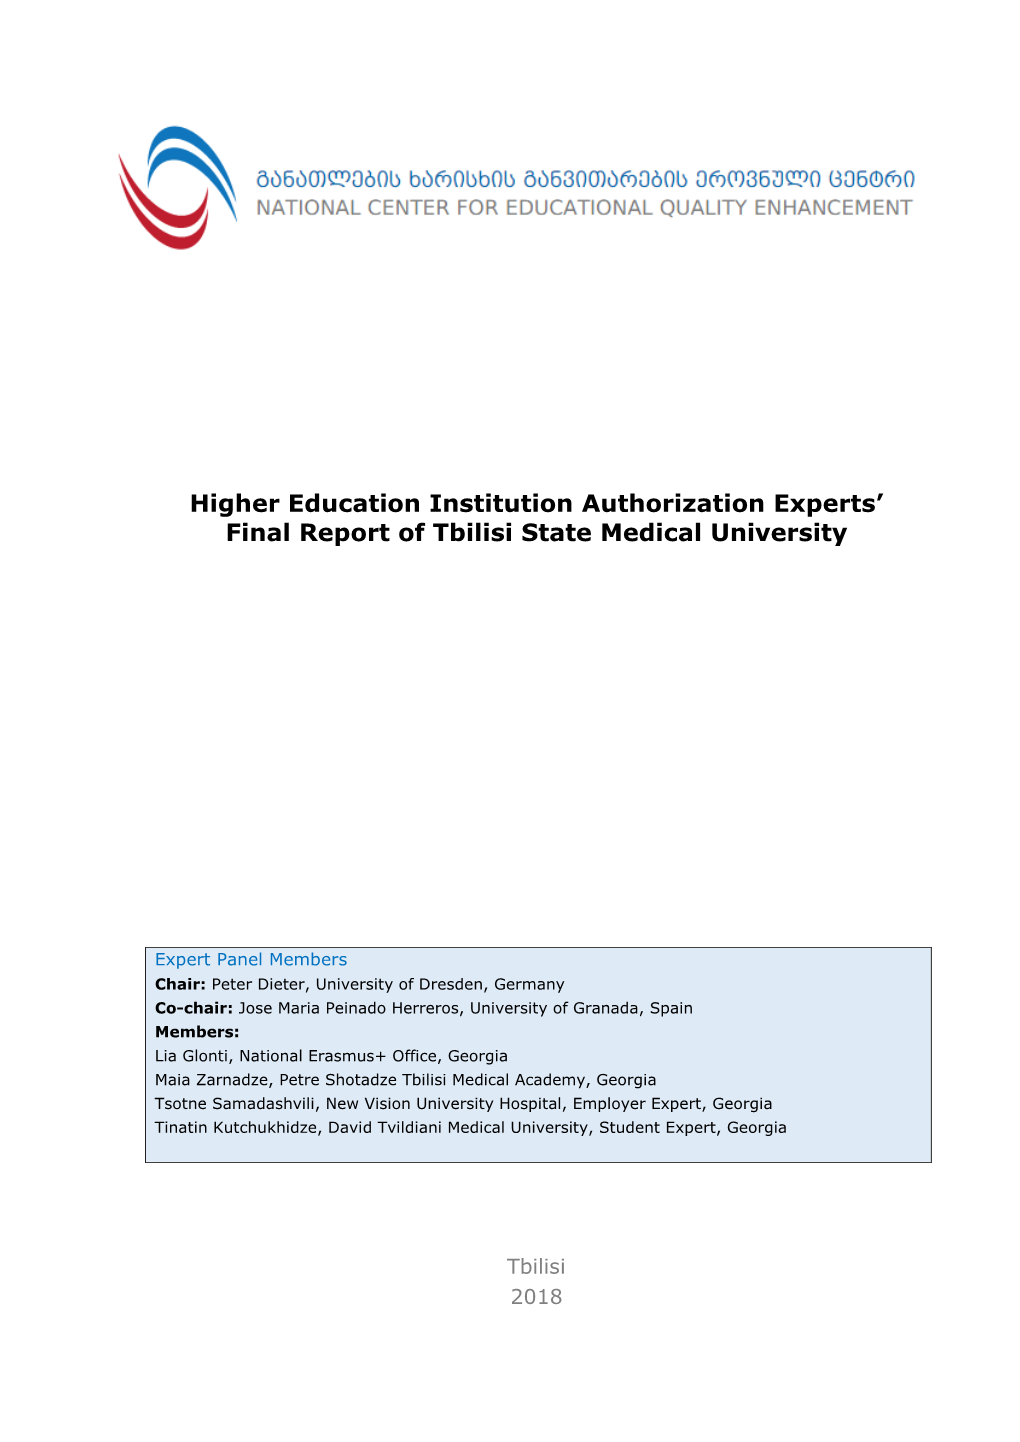 Higher Education Institution Authorization Experts' Final Report